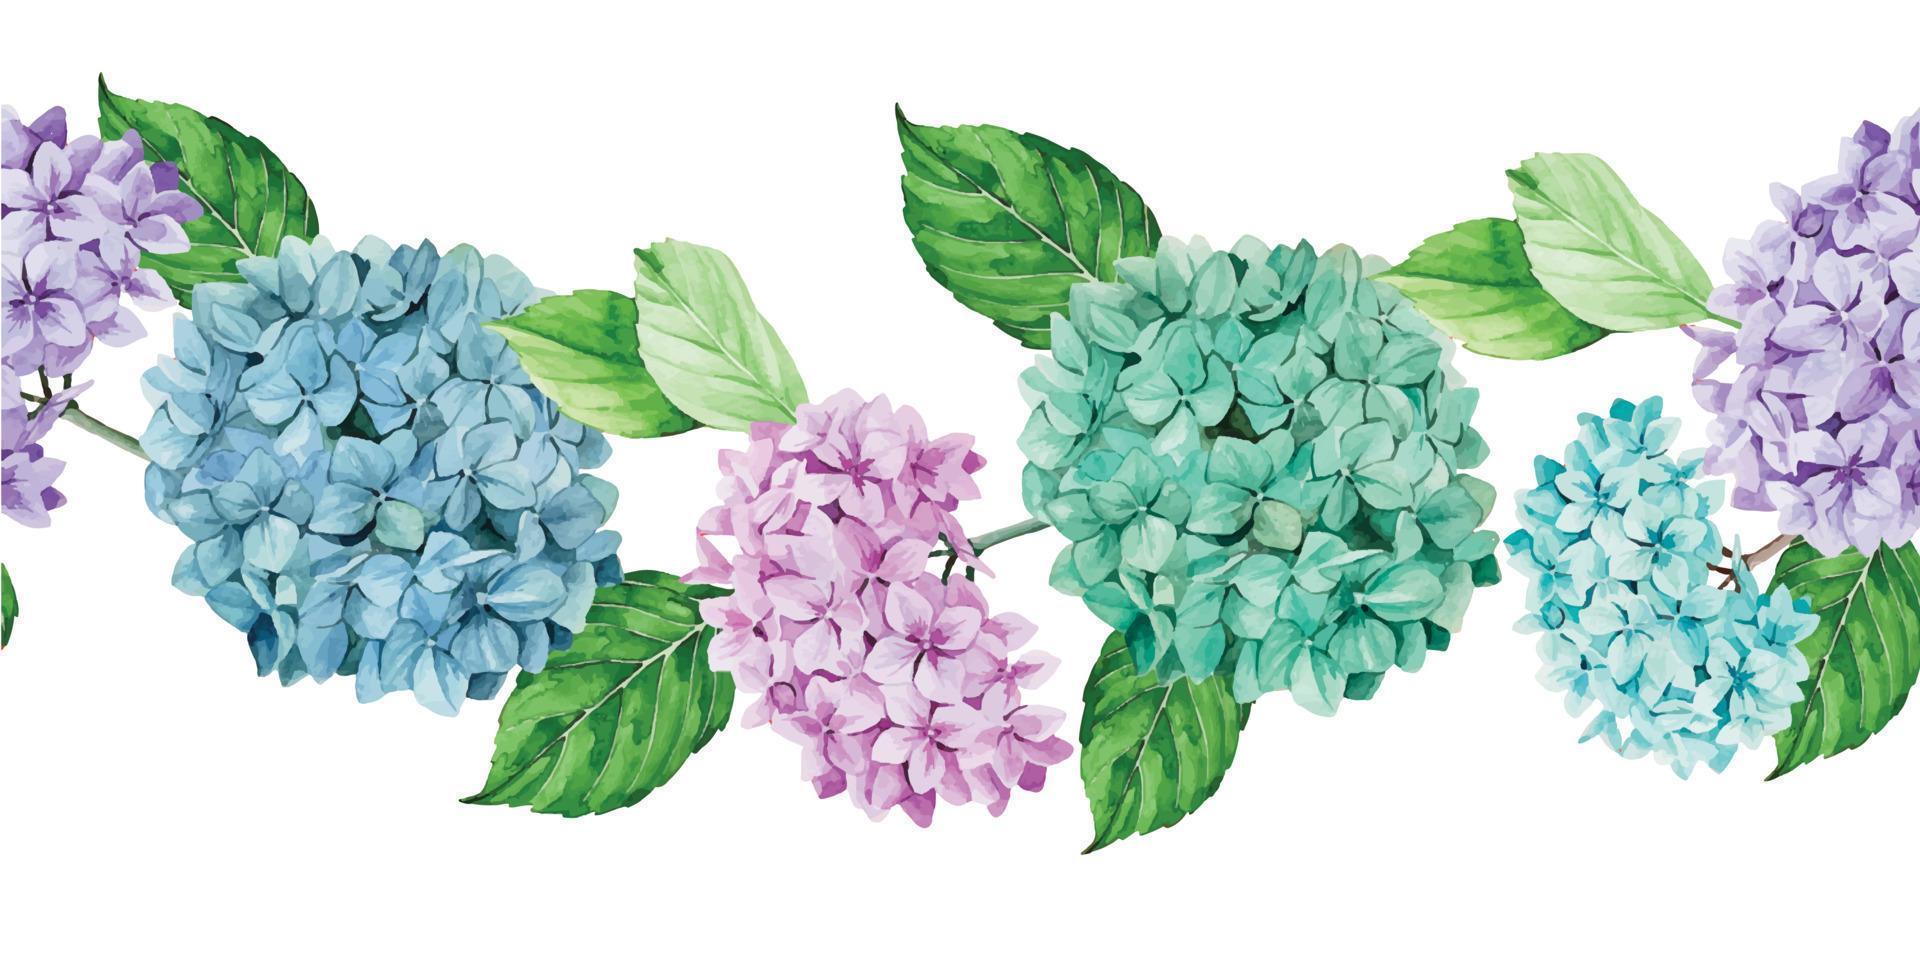 watercolor seamless border, frame, banner with hydrangea flowers and leaves. green leaves and blue, pink, purple hydrangea flowers isolated on white background. vector